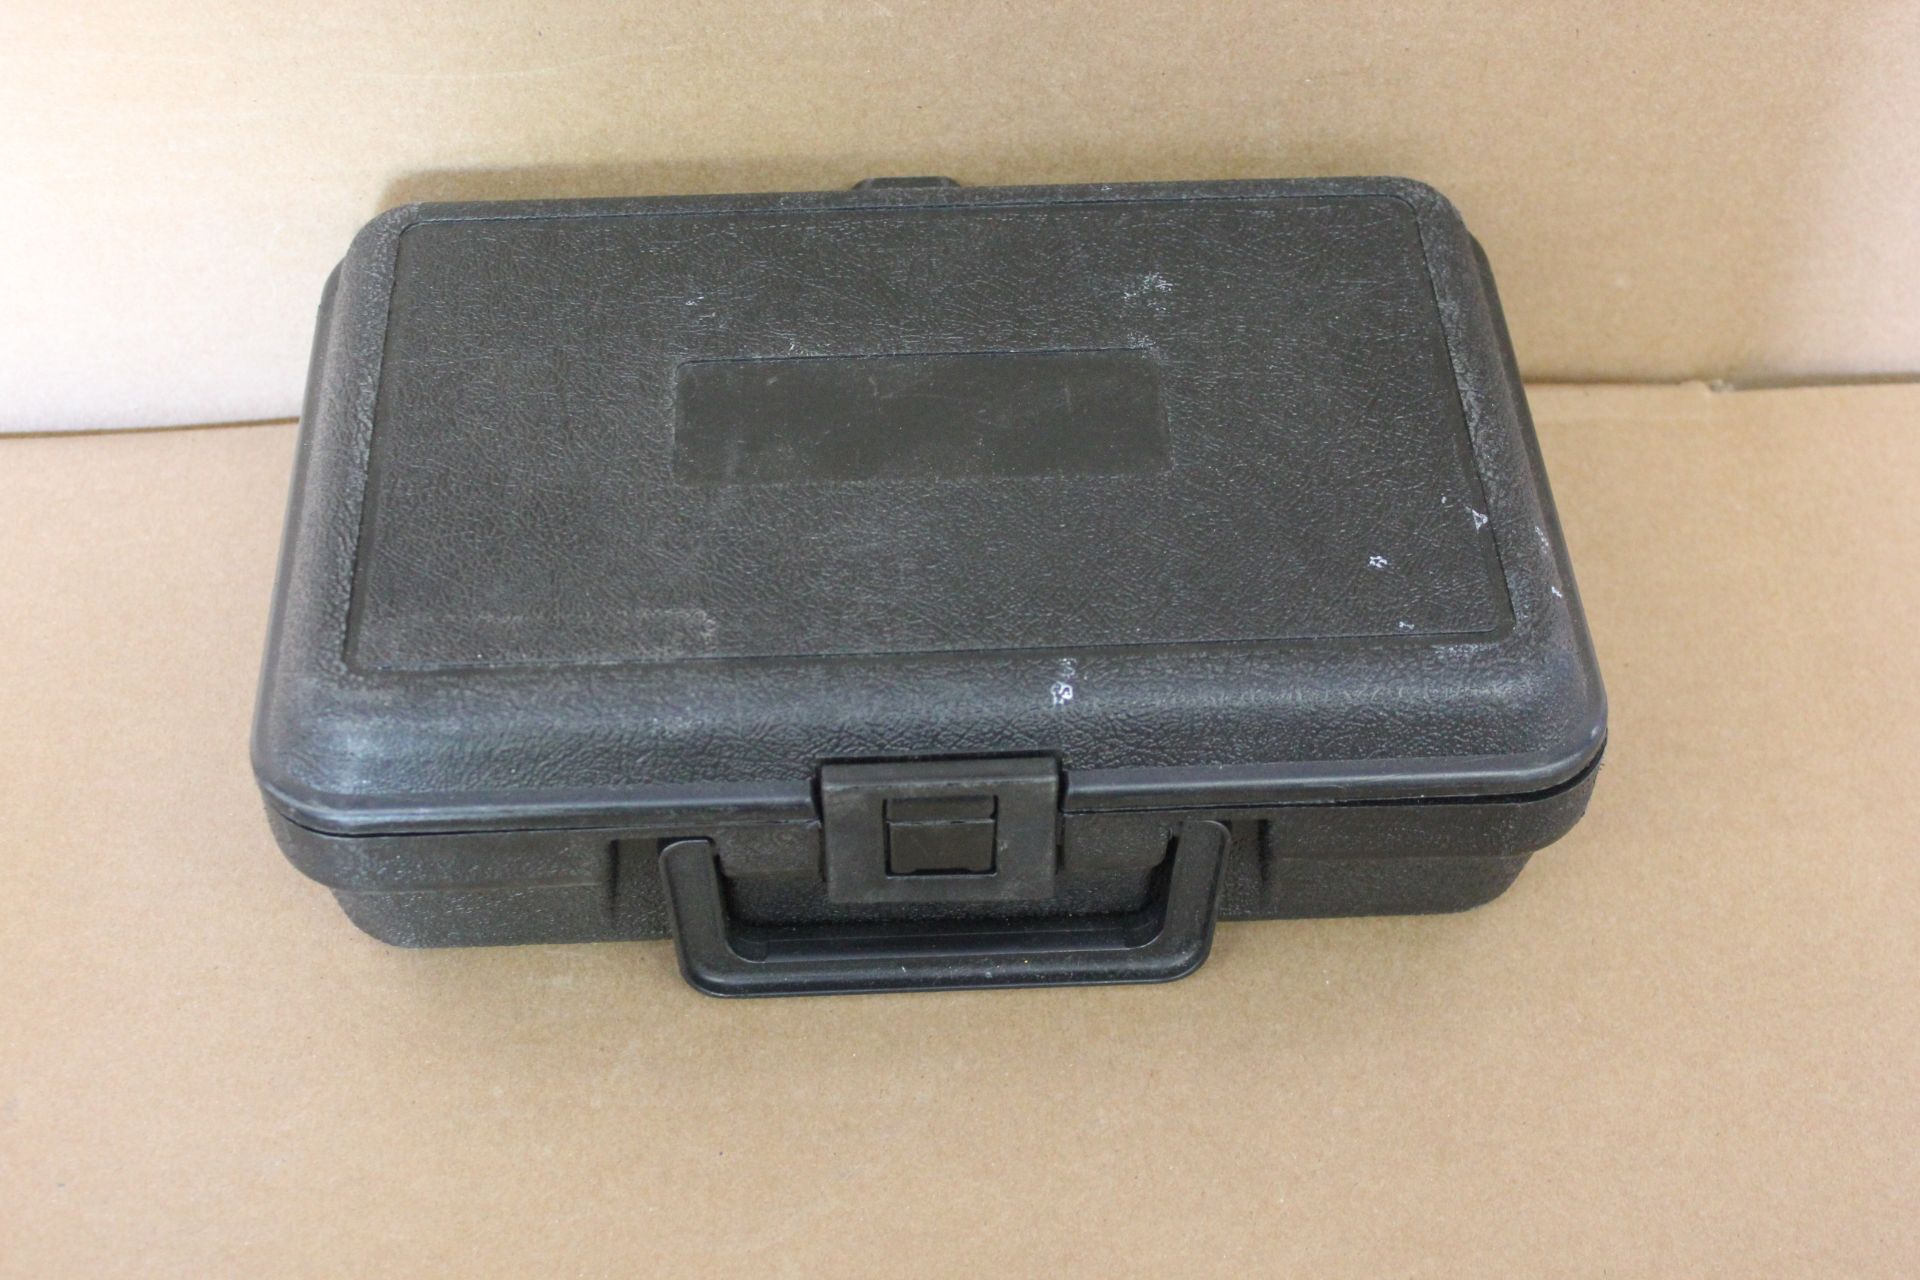 NEWPORT OPTICAL POWER METER WITH CASE